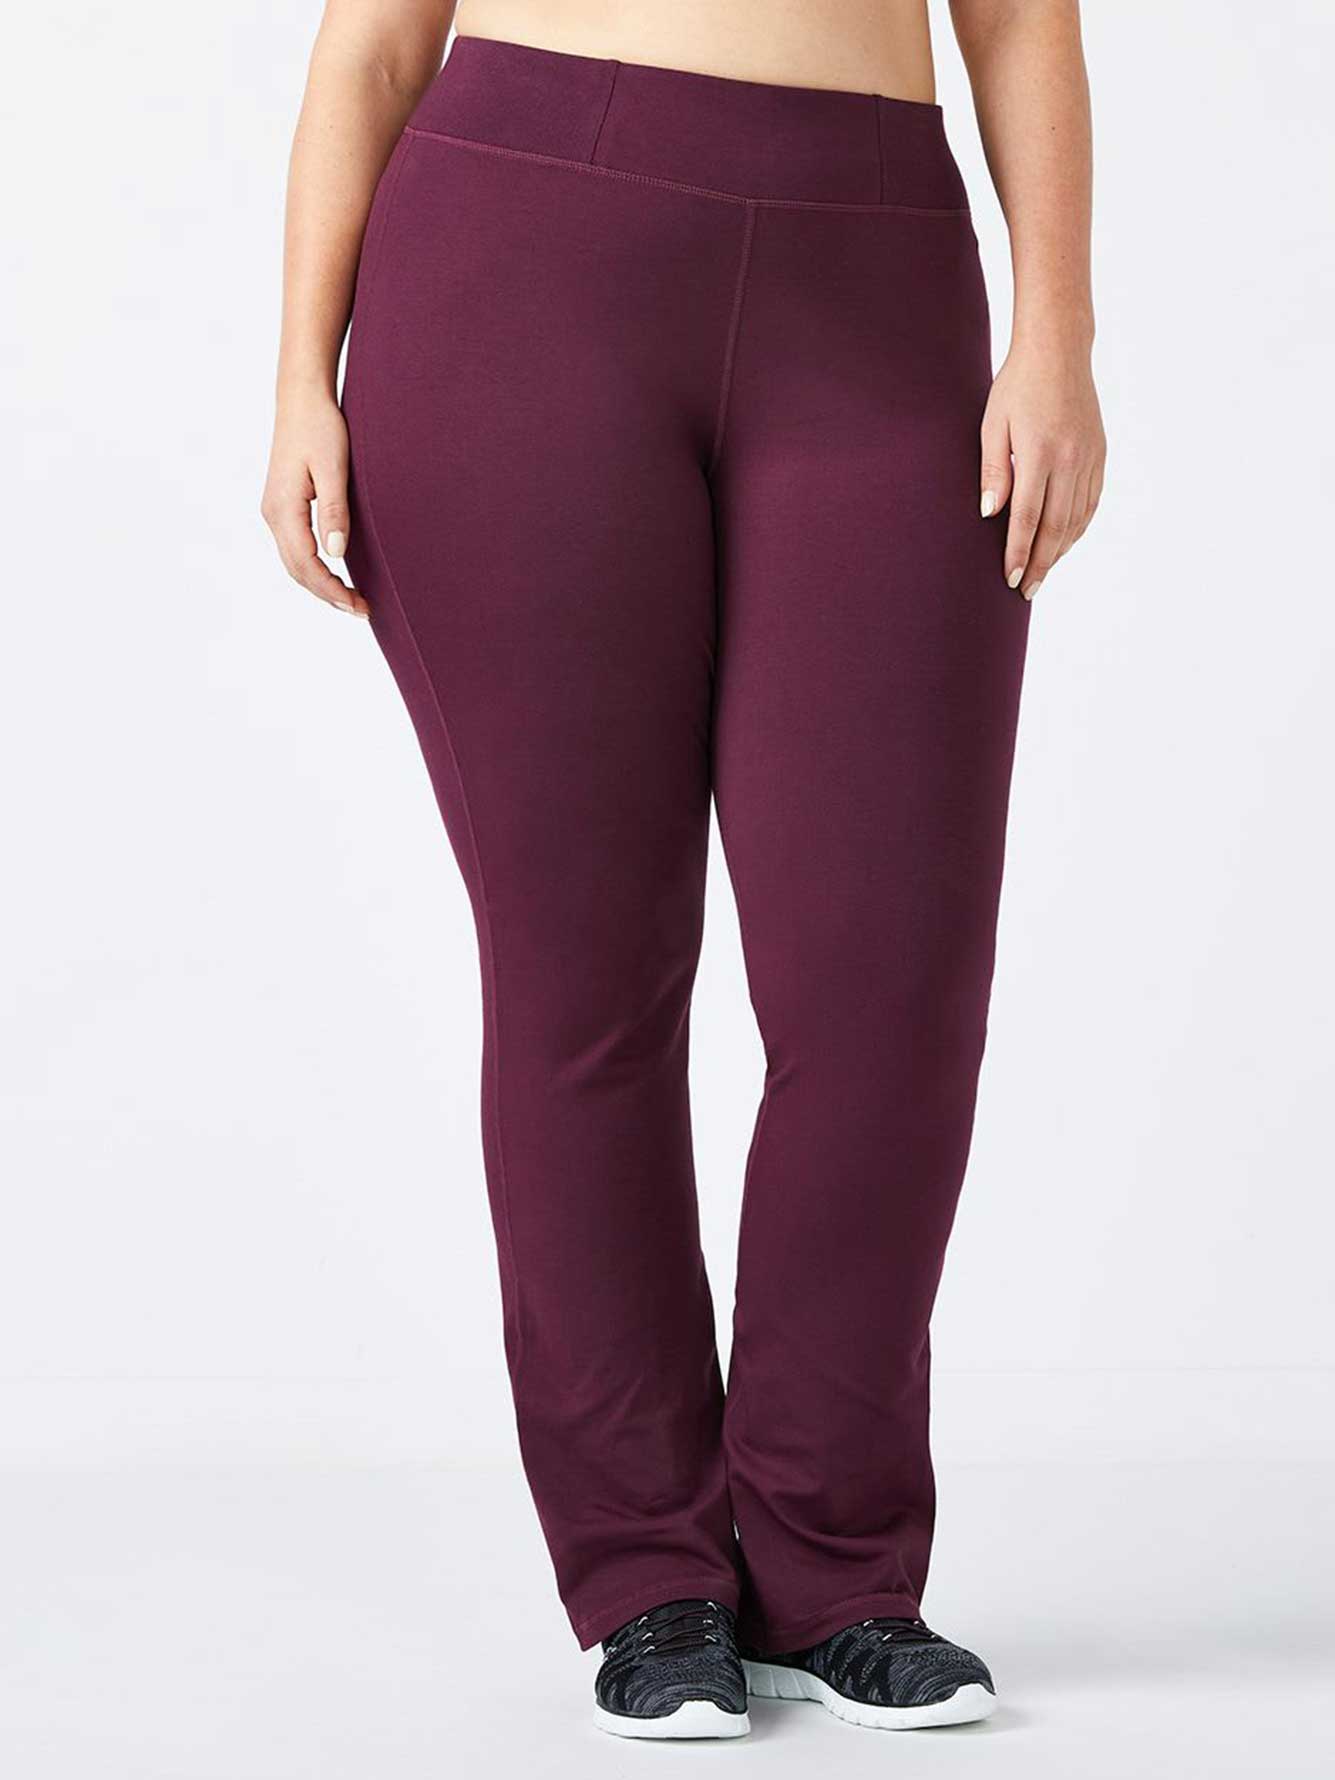 Athletic Works Women's Relaxed Fit Dri-More Core Cotton Blend Yoga Pants  Available in Regular and Petite